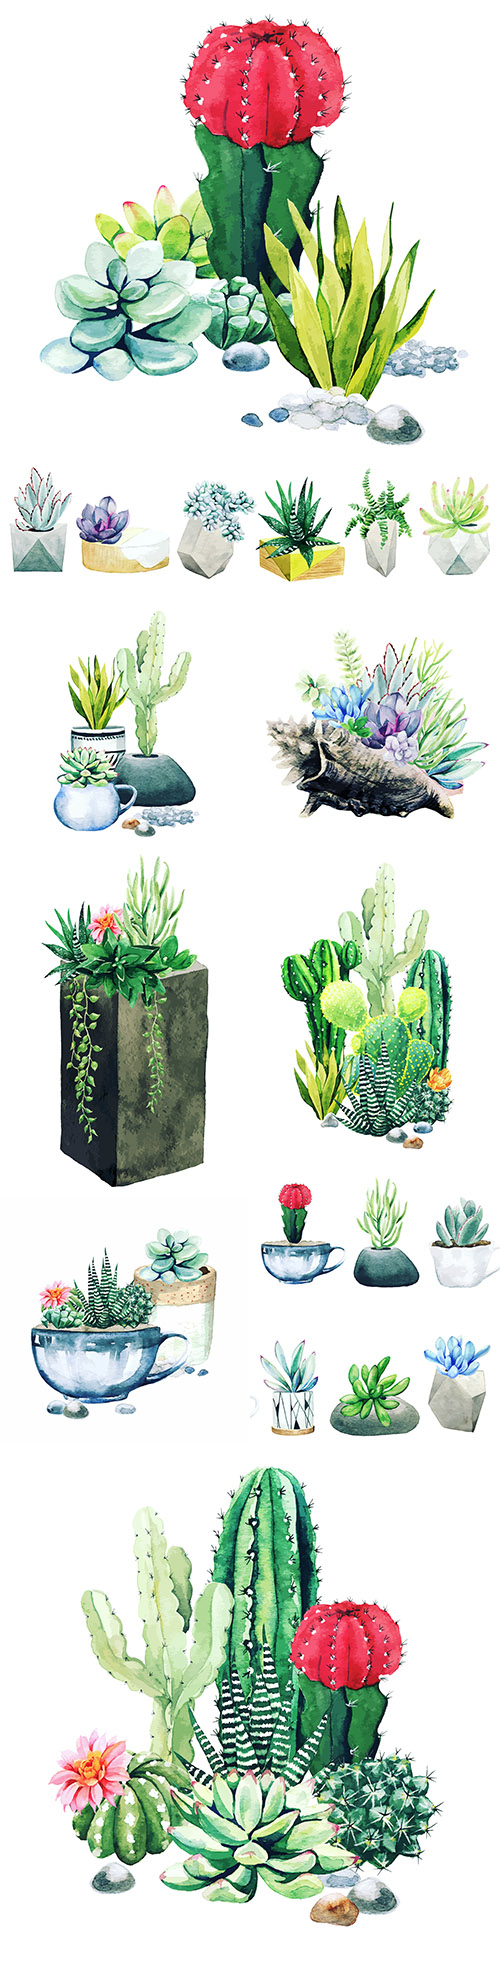 Cacti and succulents composition from potted watercolor plants
